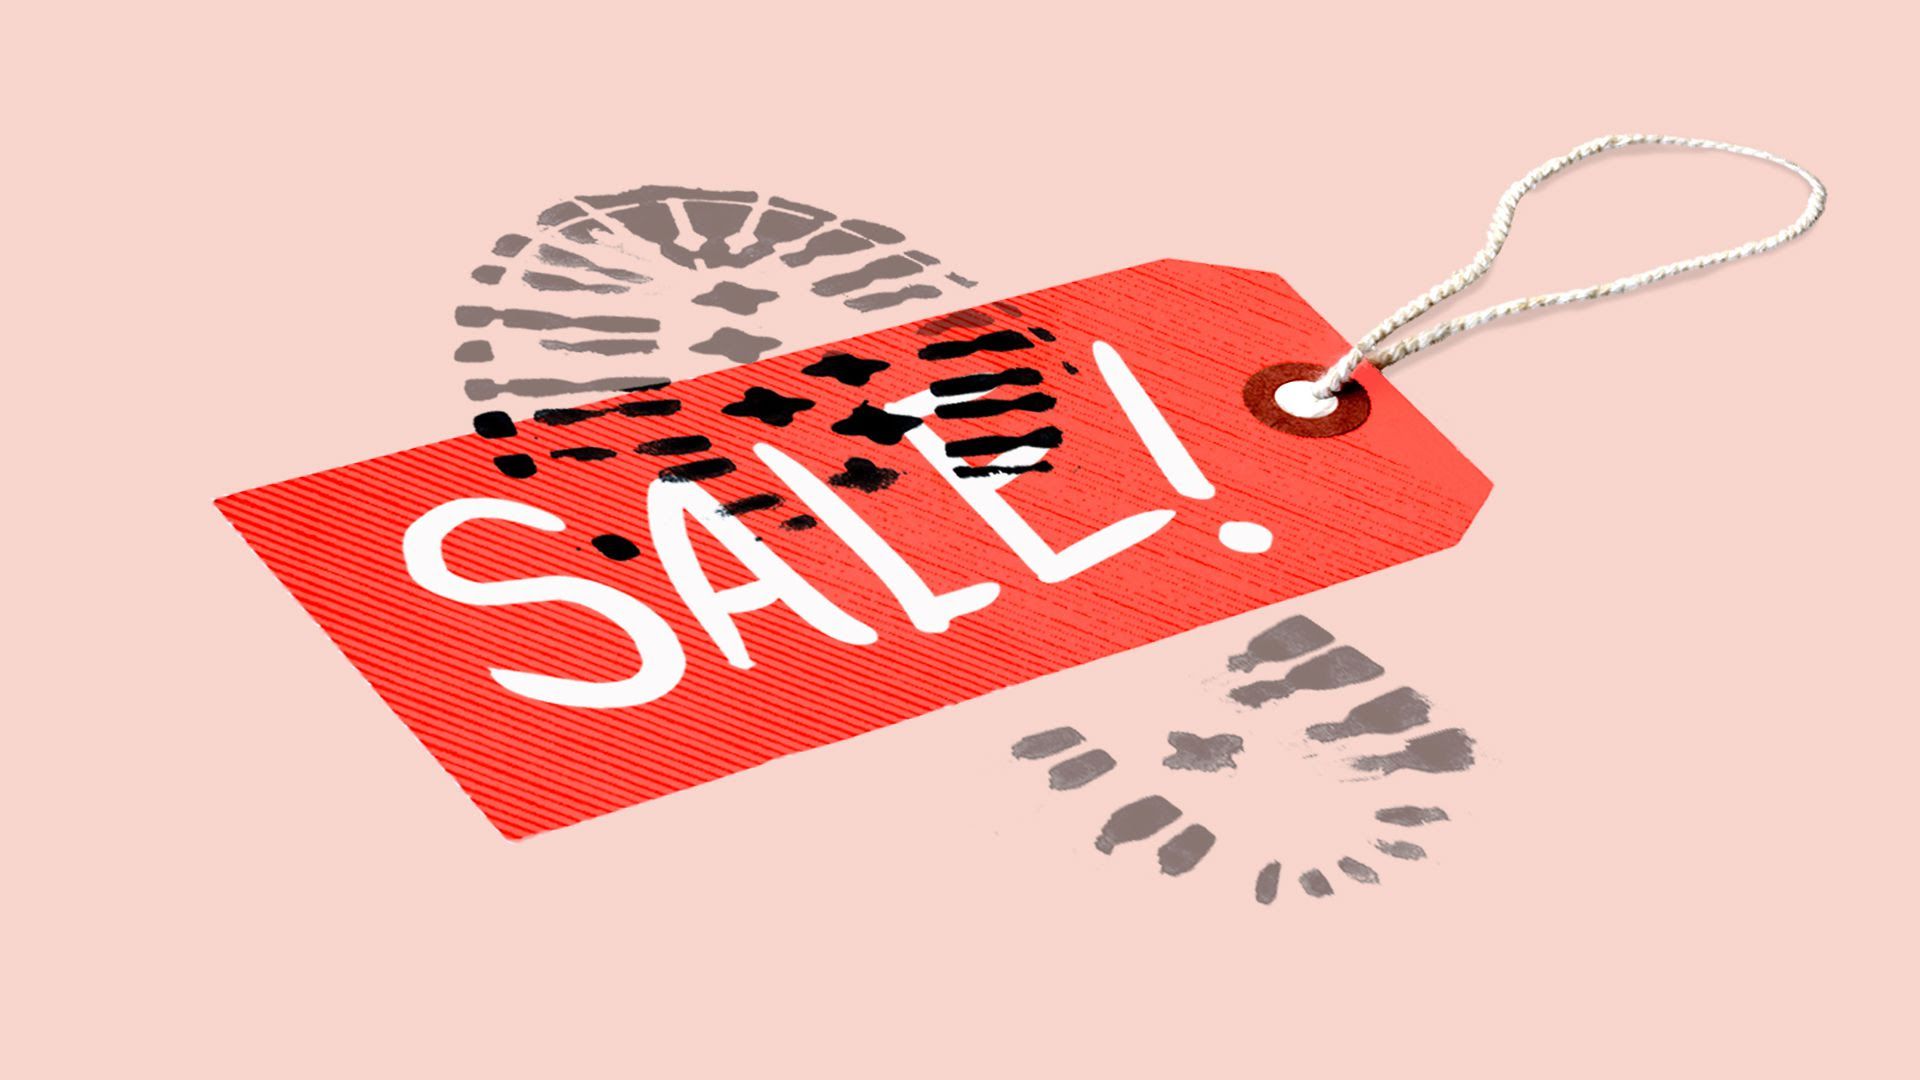 Axios illustration of footprint over 'Sale' tag